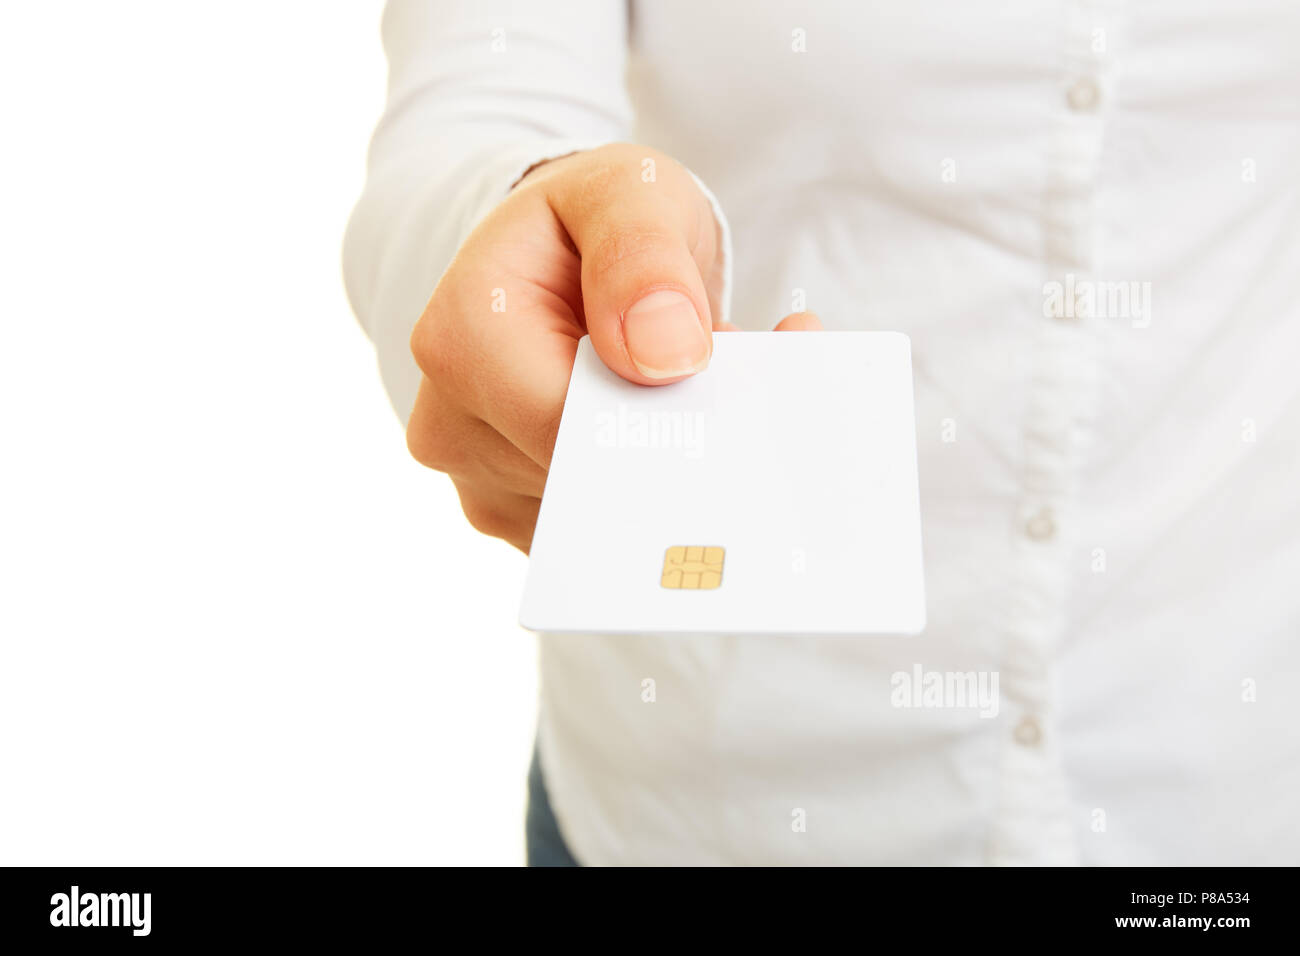 Female hand is holding a blank smart card or smartcard with contact chip Stock Photo